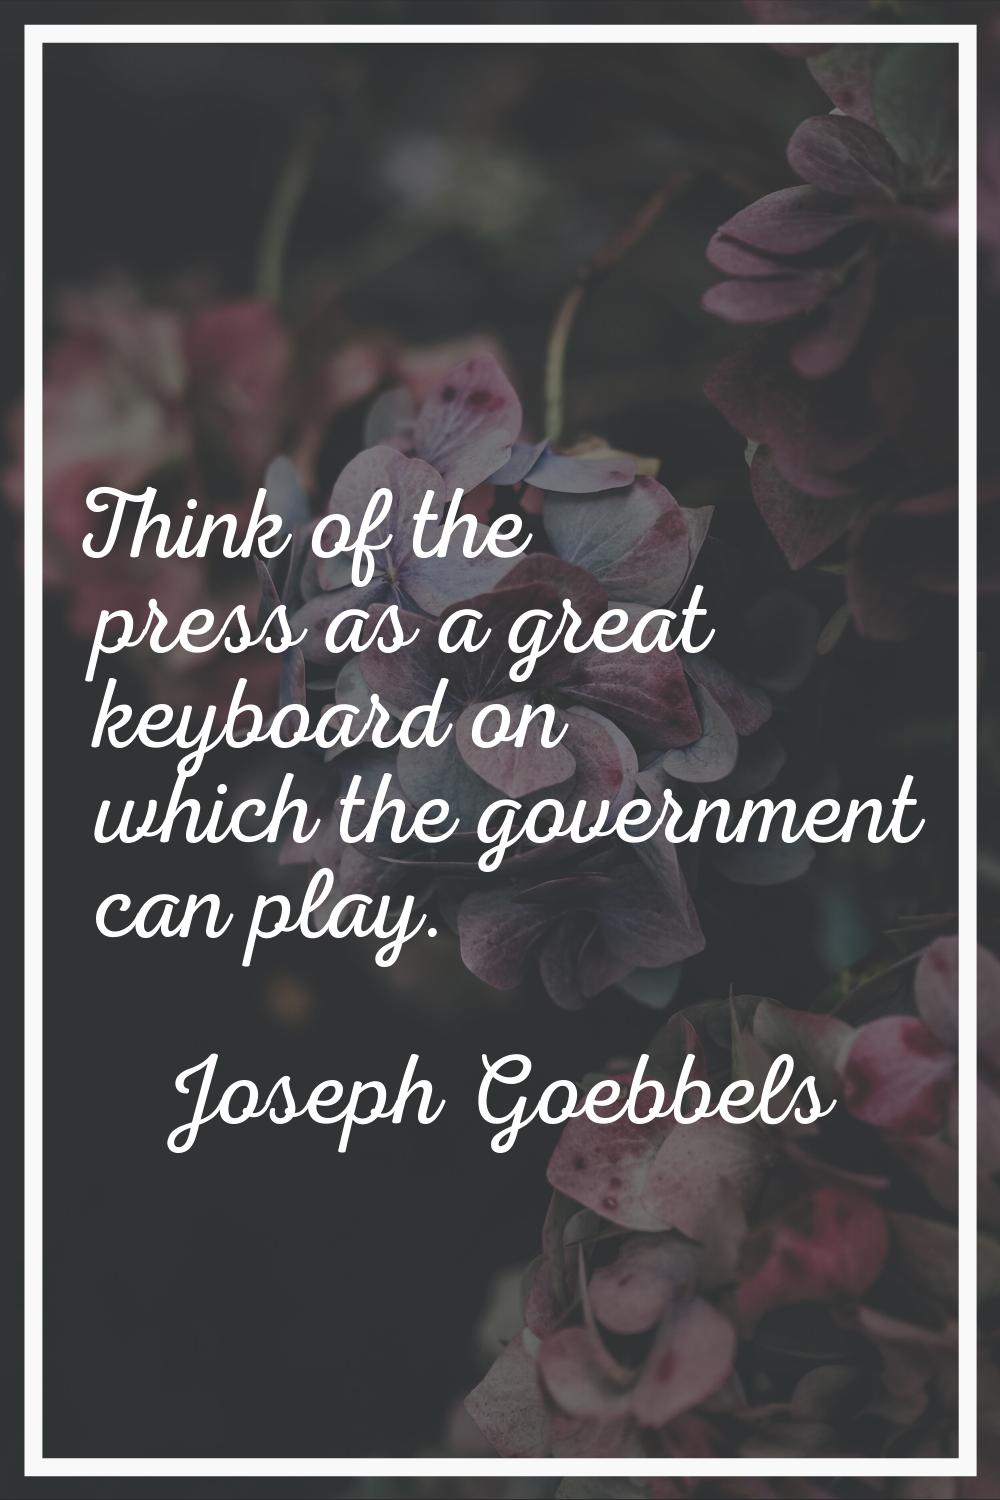 Think of the press as a great keyboard on which the government can play.